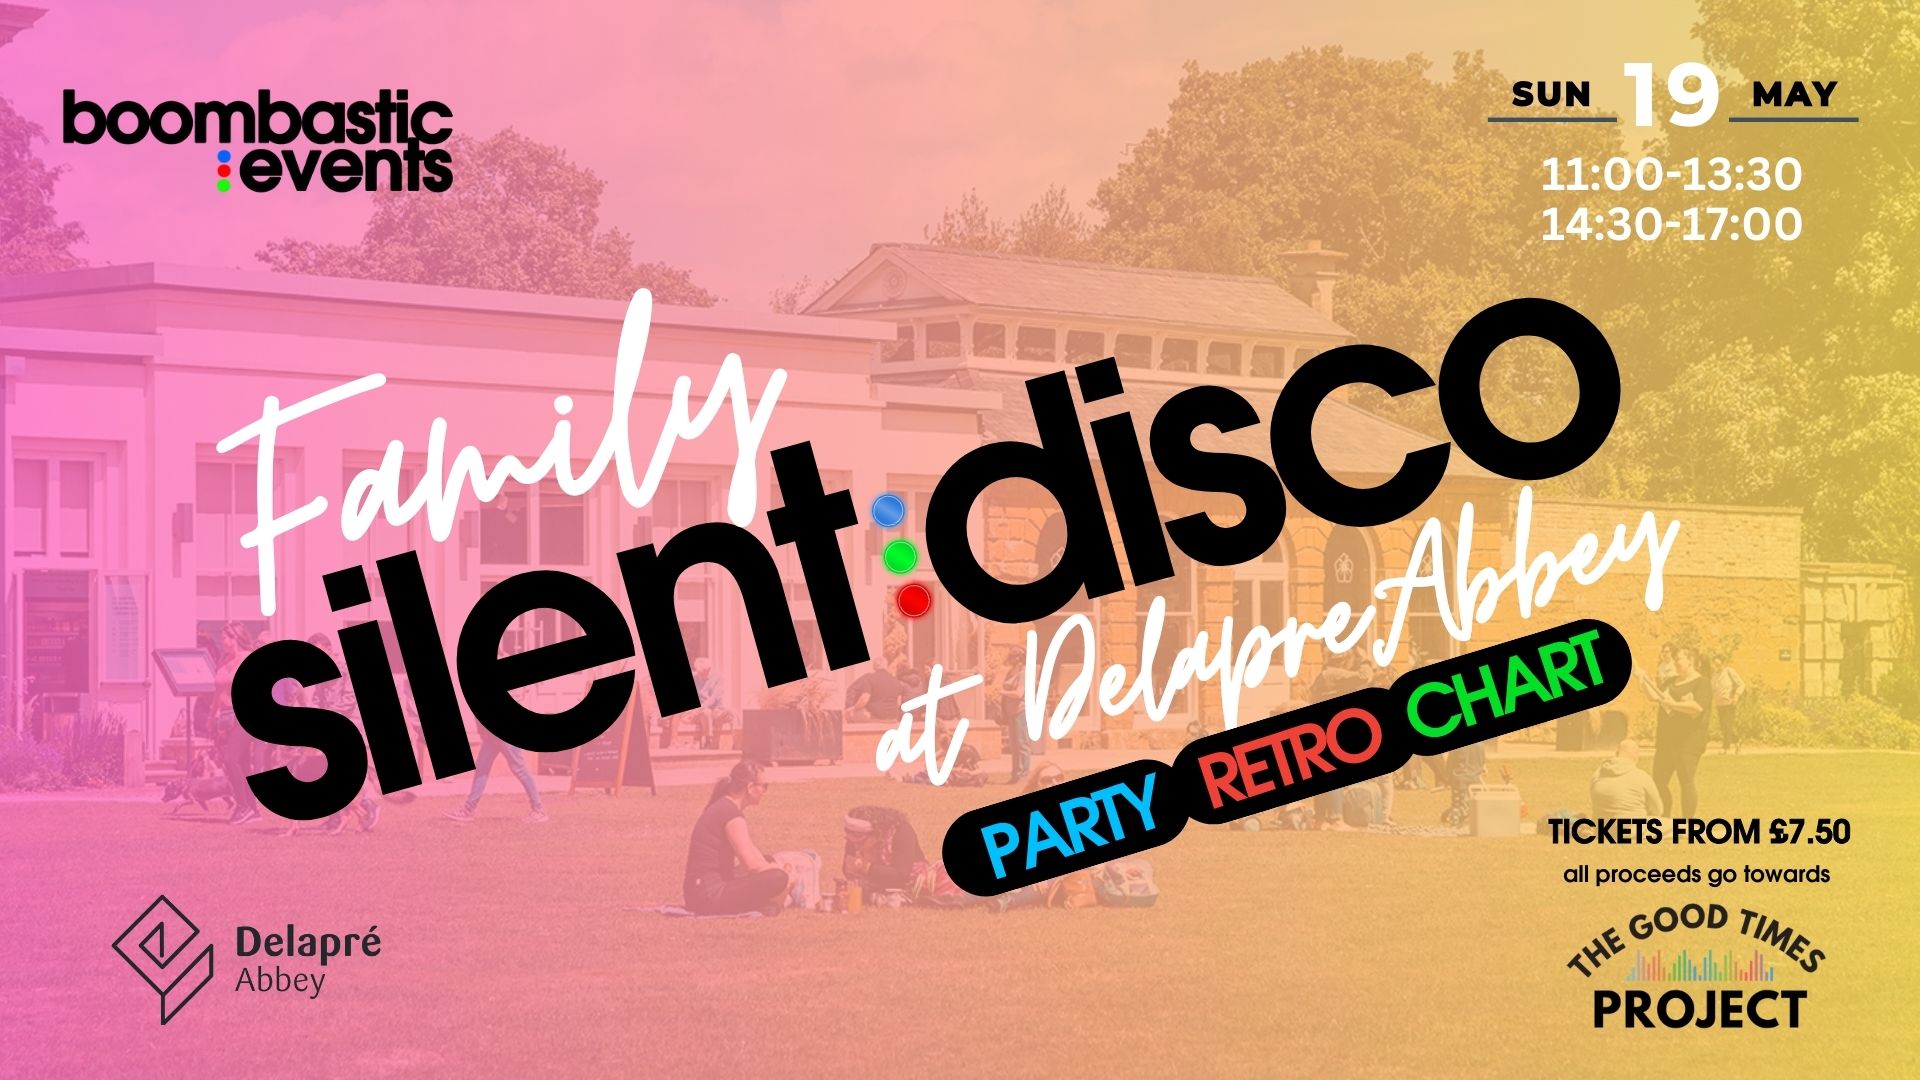 Family Silent Disco at Delapre Abbey - 2 sessions